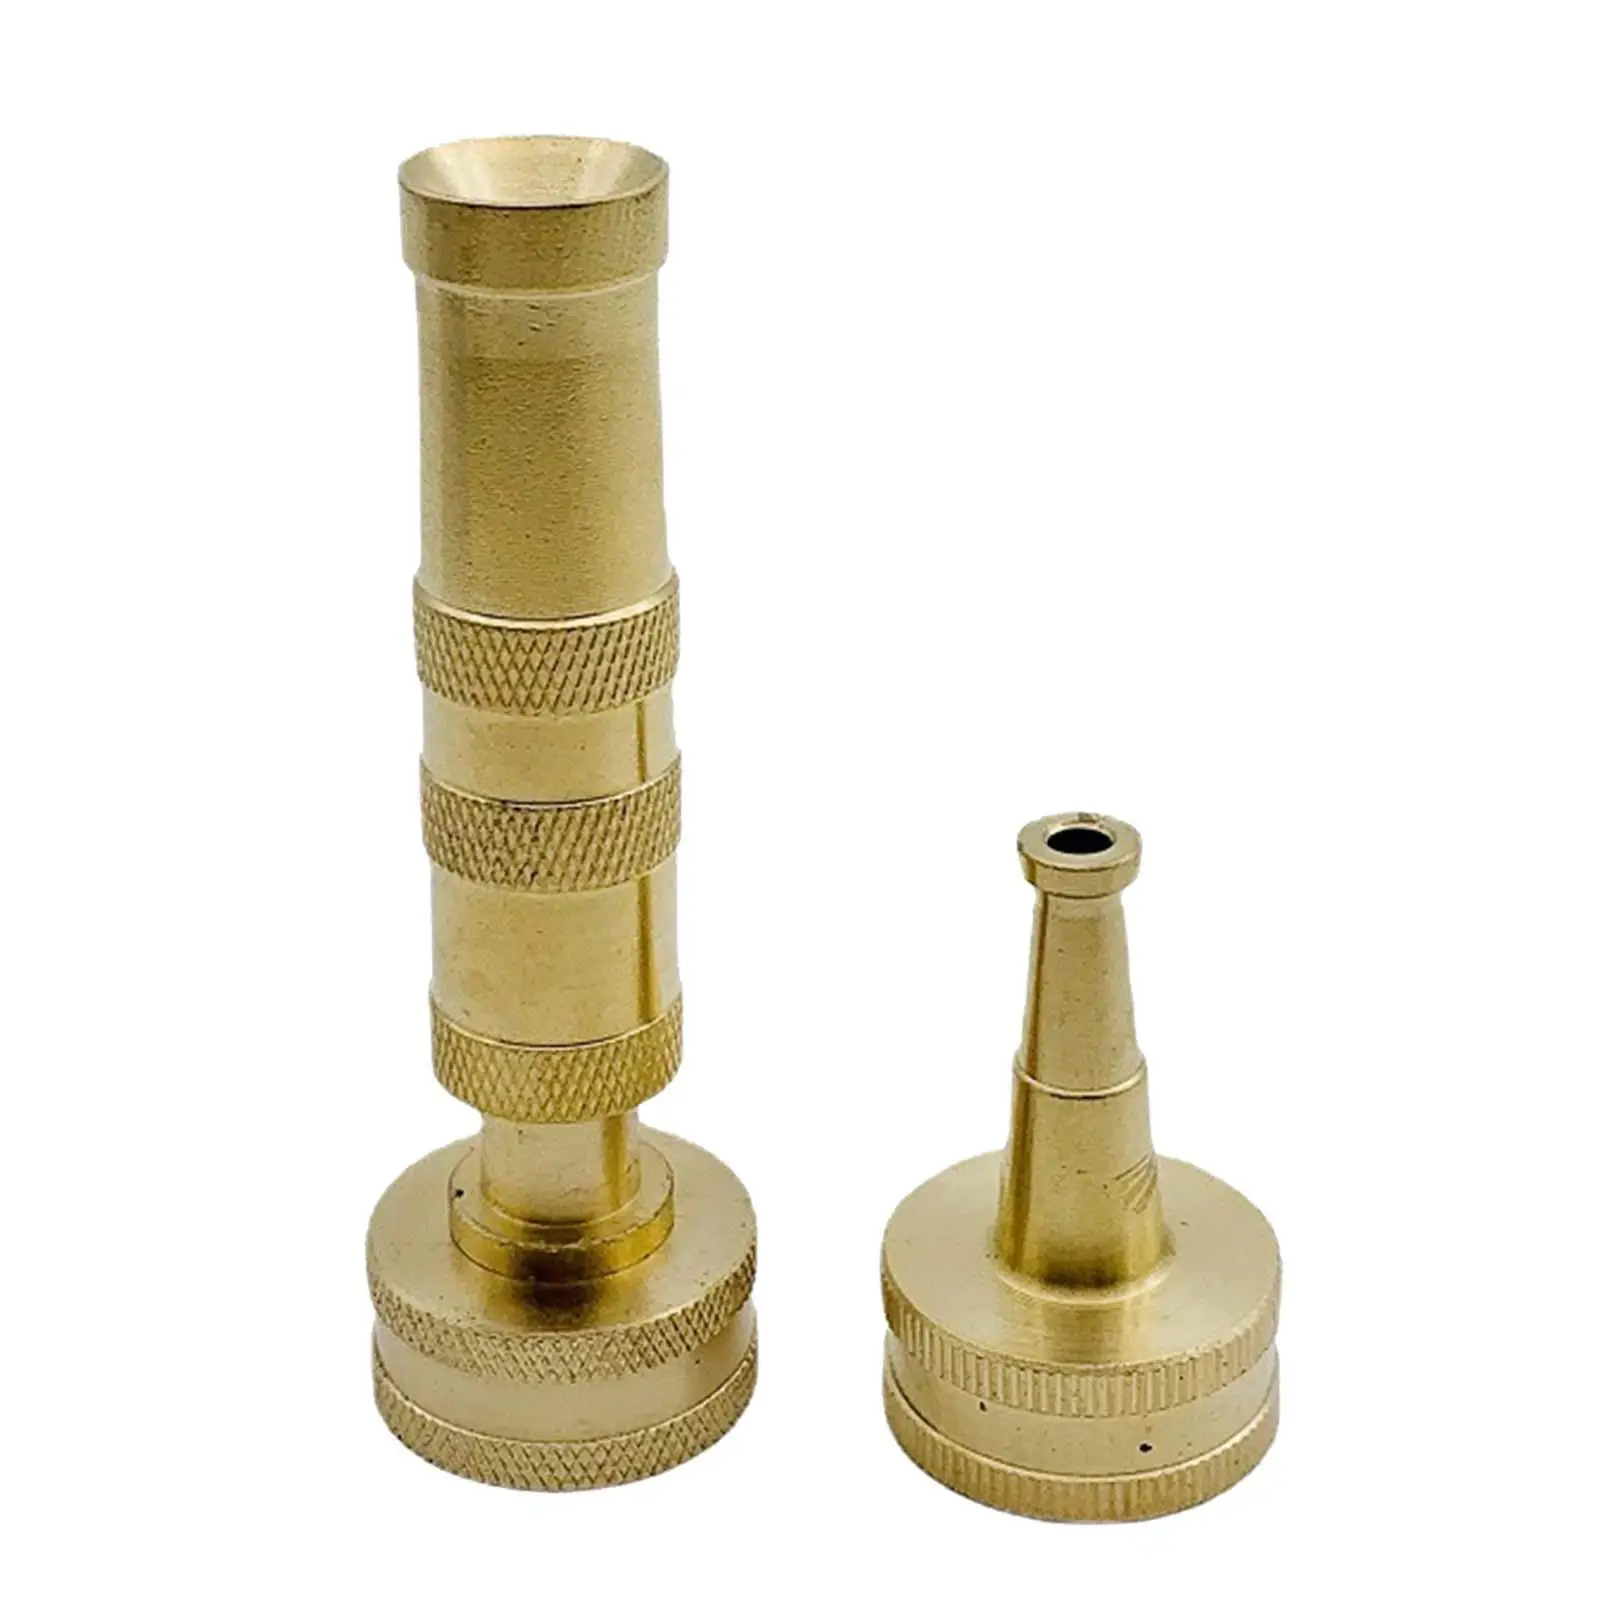 Solid Brass Hose Nozzle for Garden Heavy Duty Metal Twist Hose Nozzle Jet Sweeper Nozzle for Plants House Yard car Wash